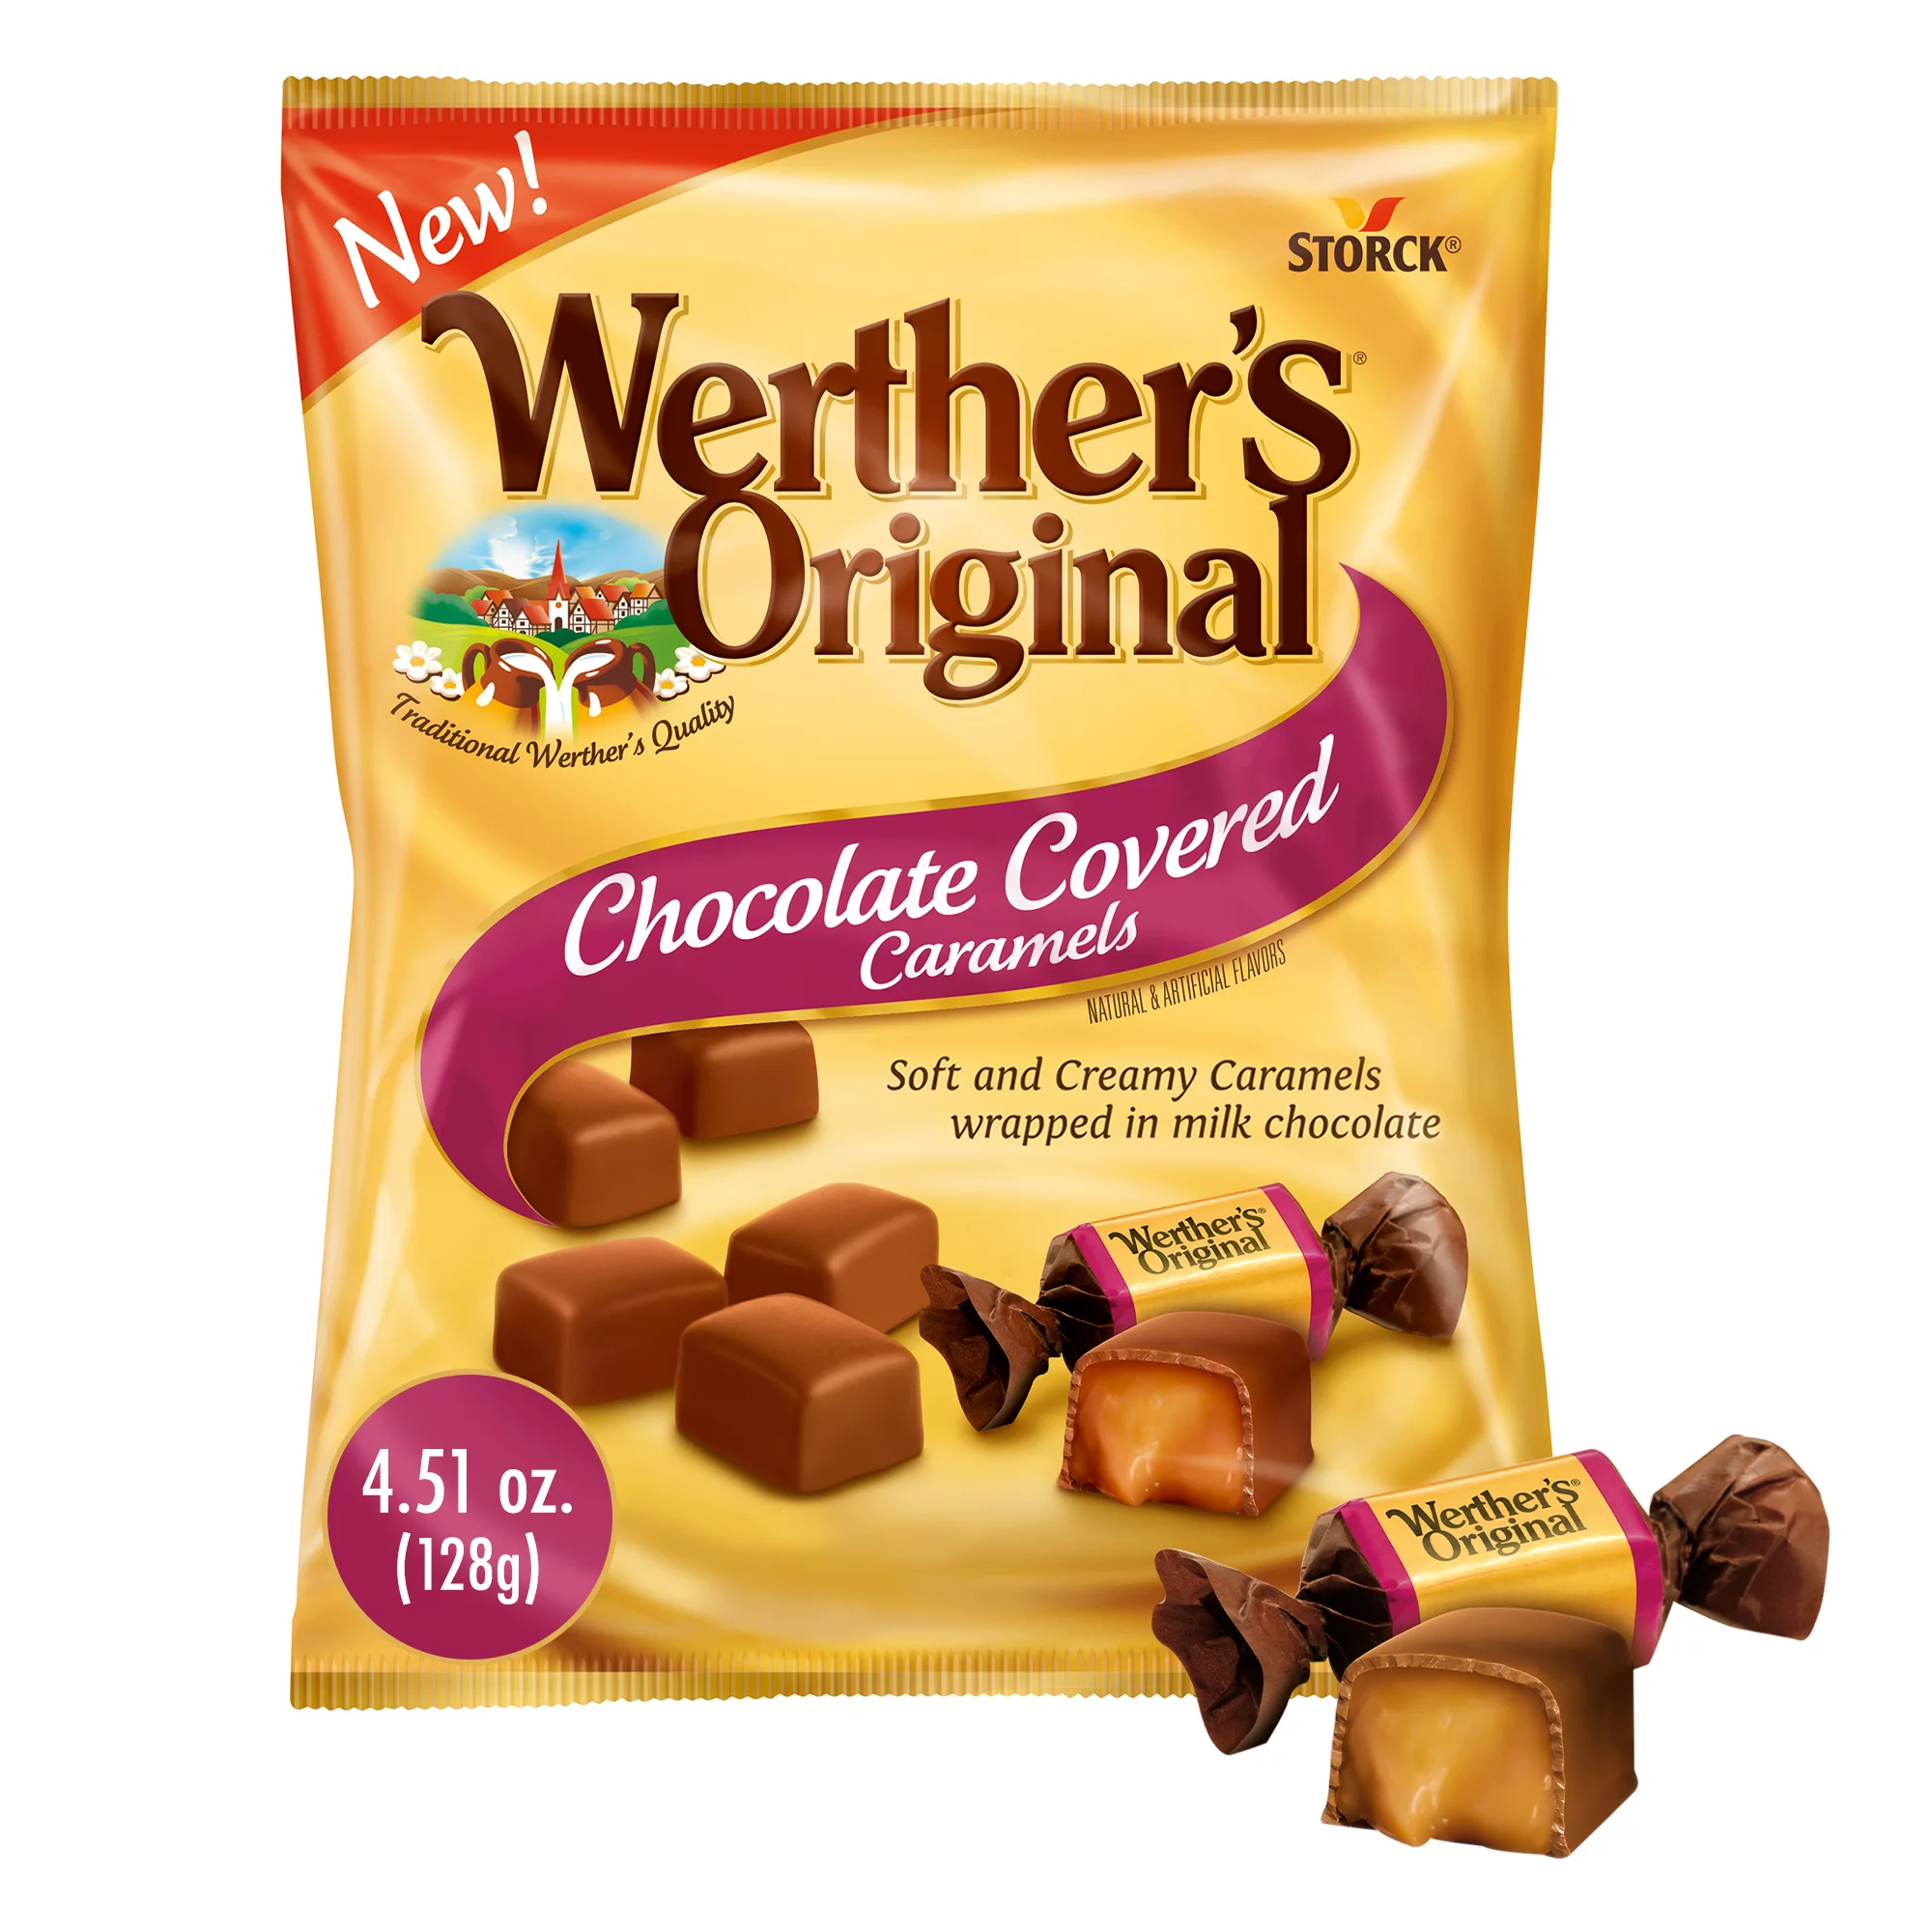 SAVE $2.00 On Any TWO Werther’s Original Holiday Items and Chocolate Covered Caramels